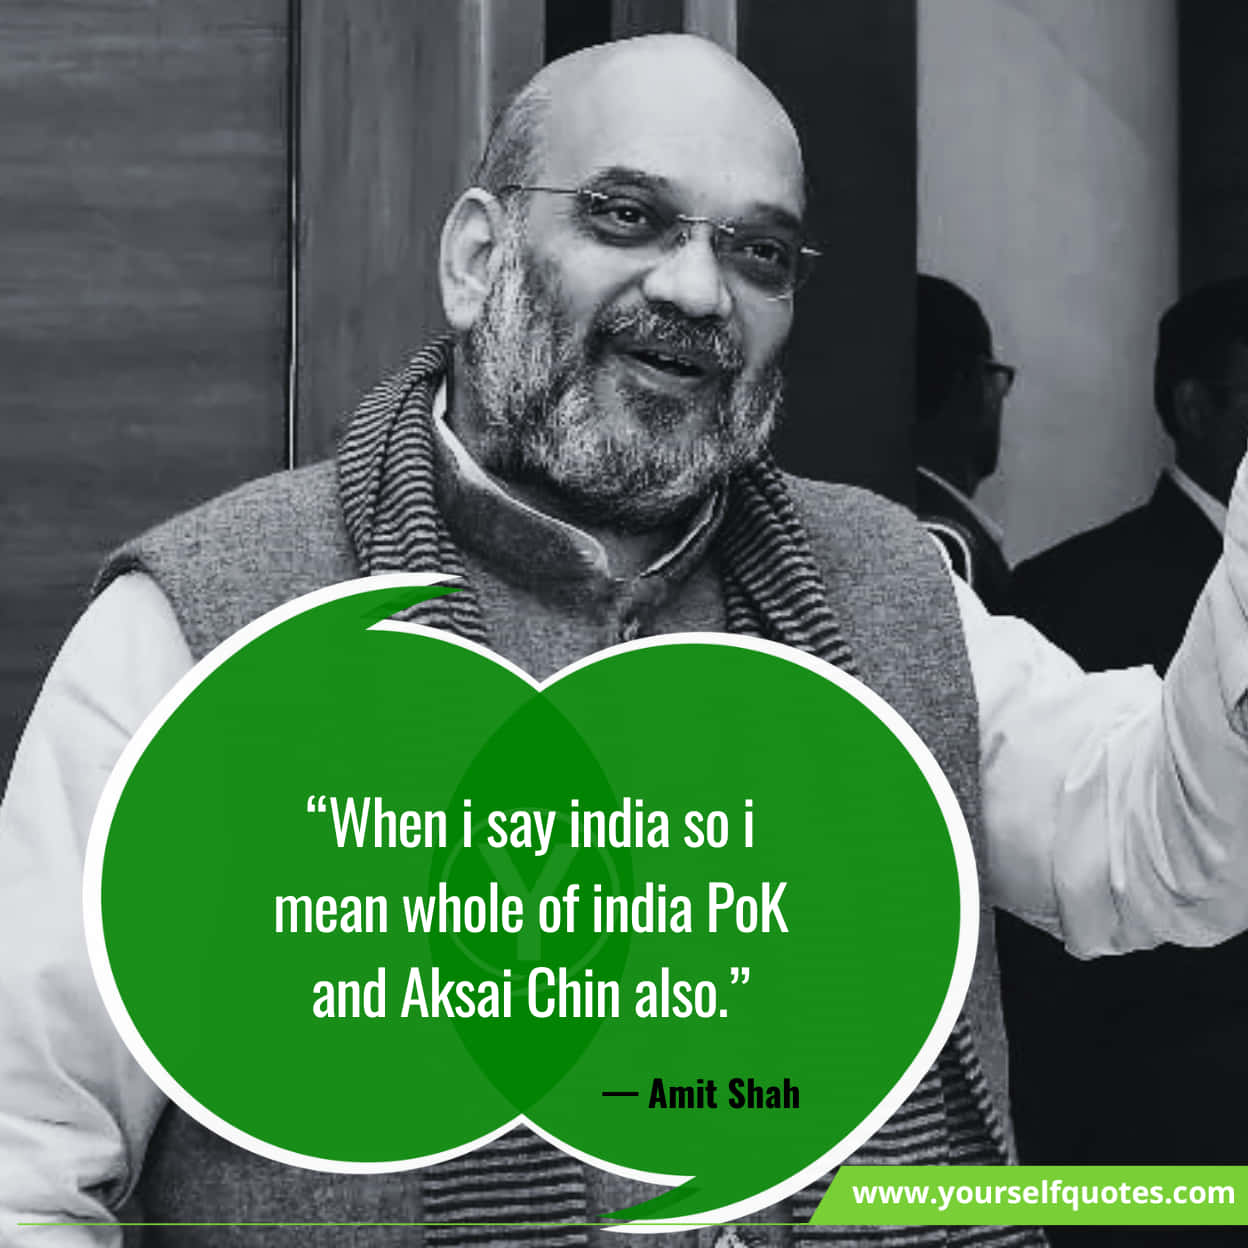 Best Amit Shah Quotes For India